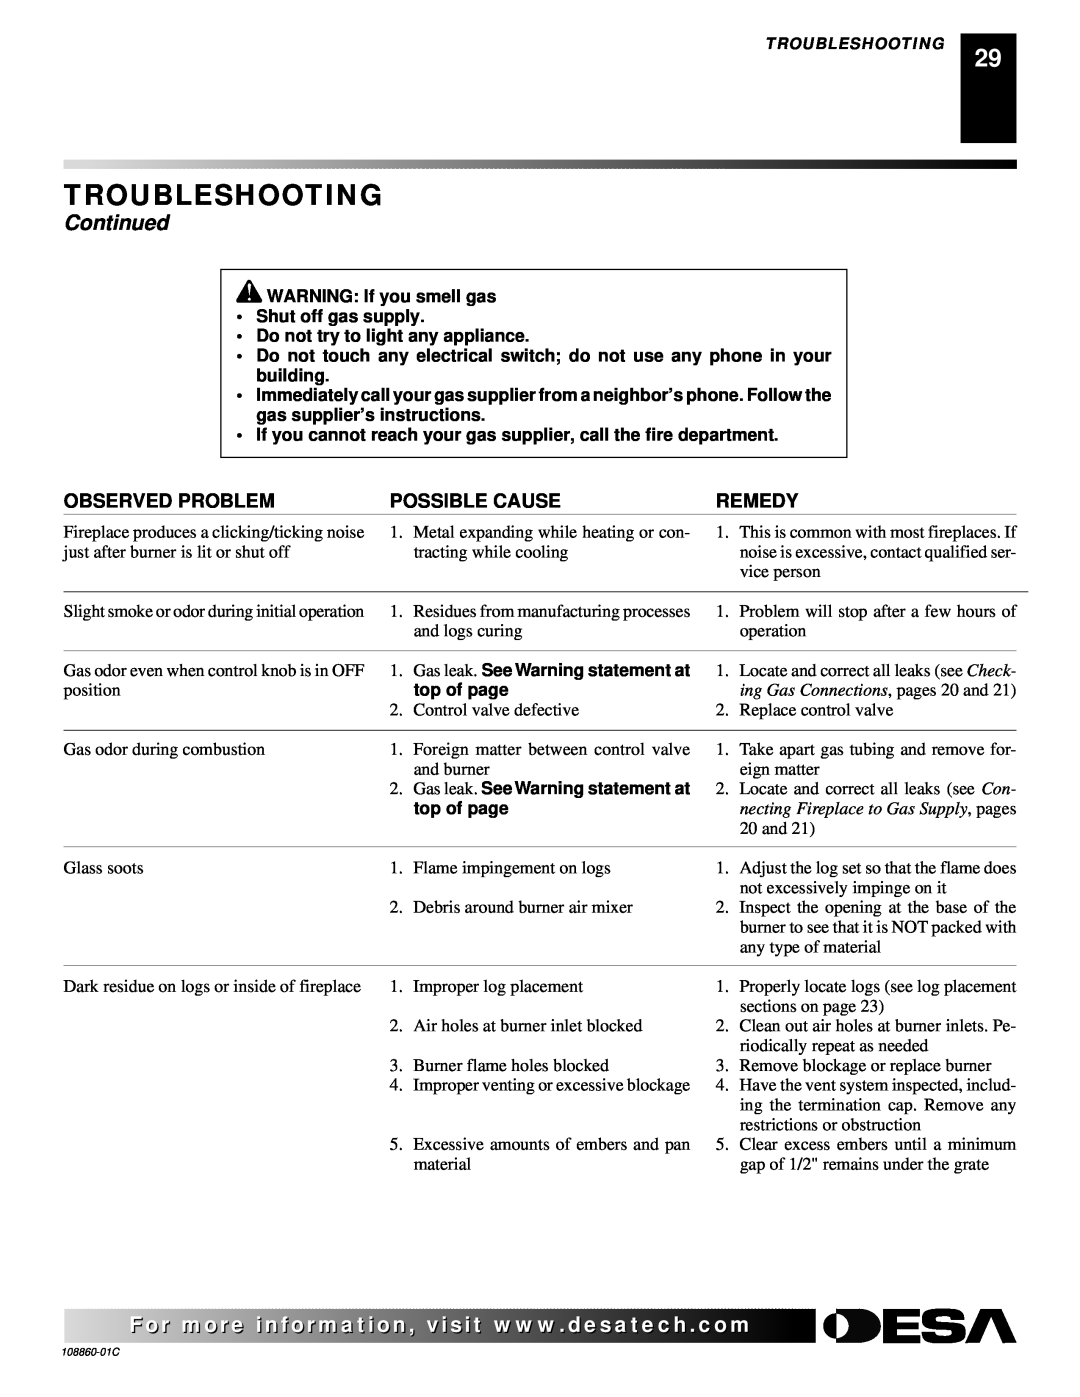 Desa (V)T36EN Troubleshooting, Continued, Observed Problem, Possible Cause, Remedy, ing Gas Connections, pages 20 and 